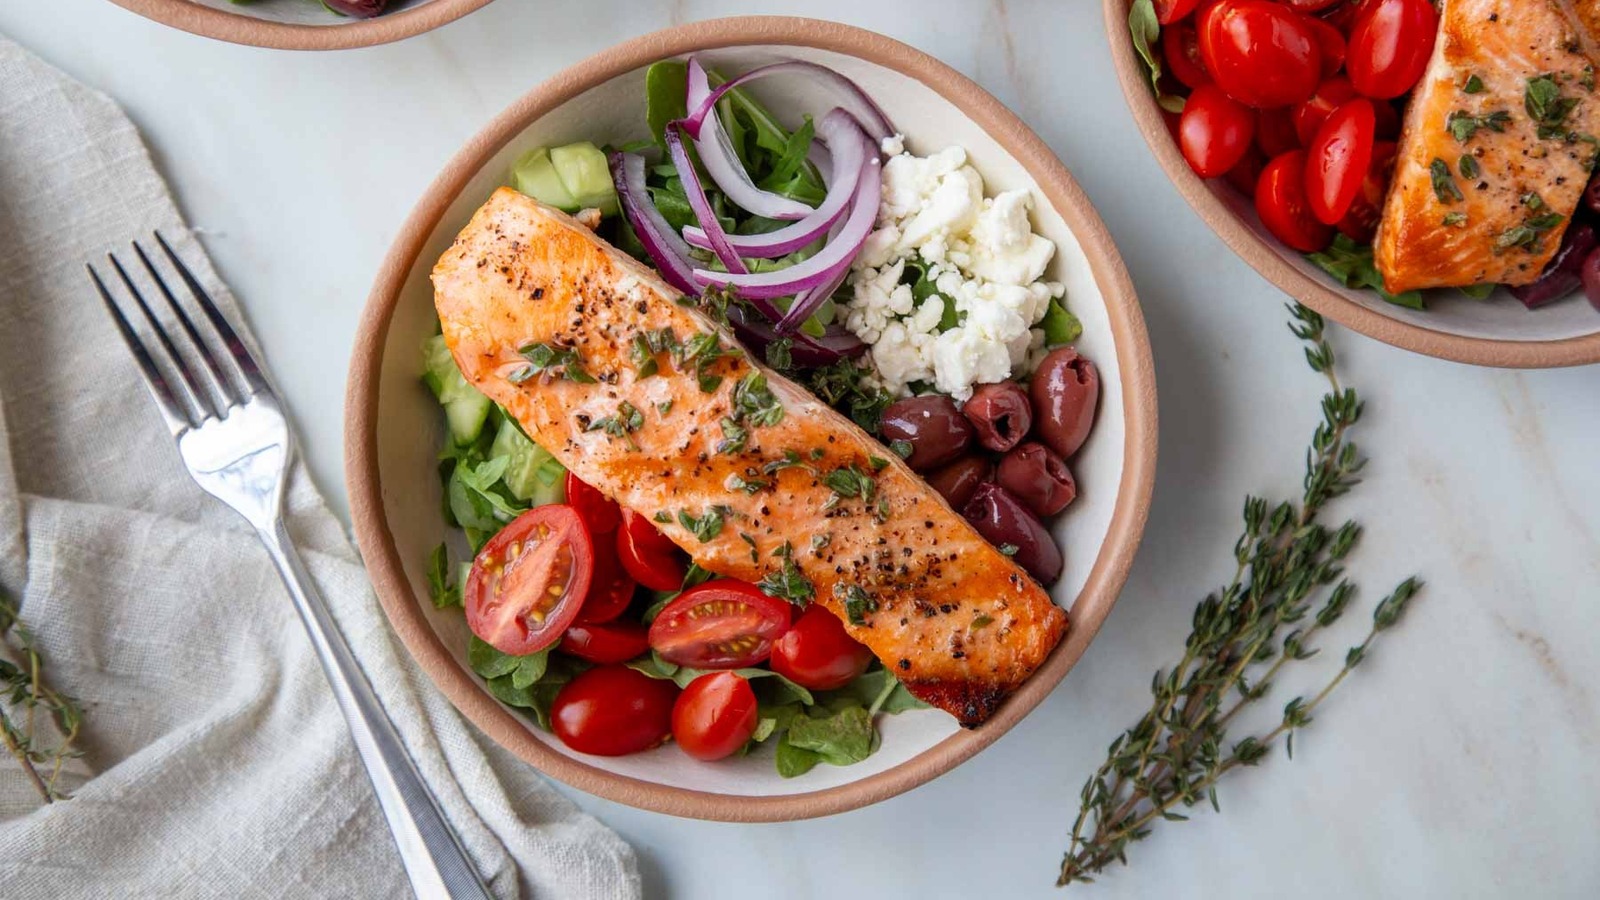 Grilled Salmon Greek Salad With Herb Dressing Recipe